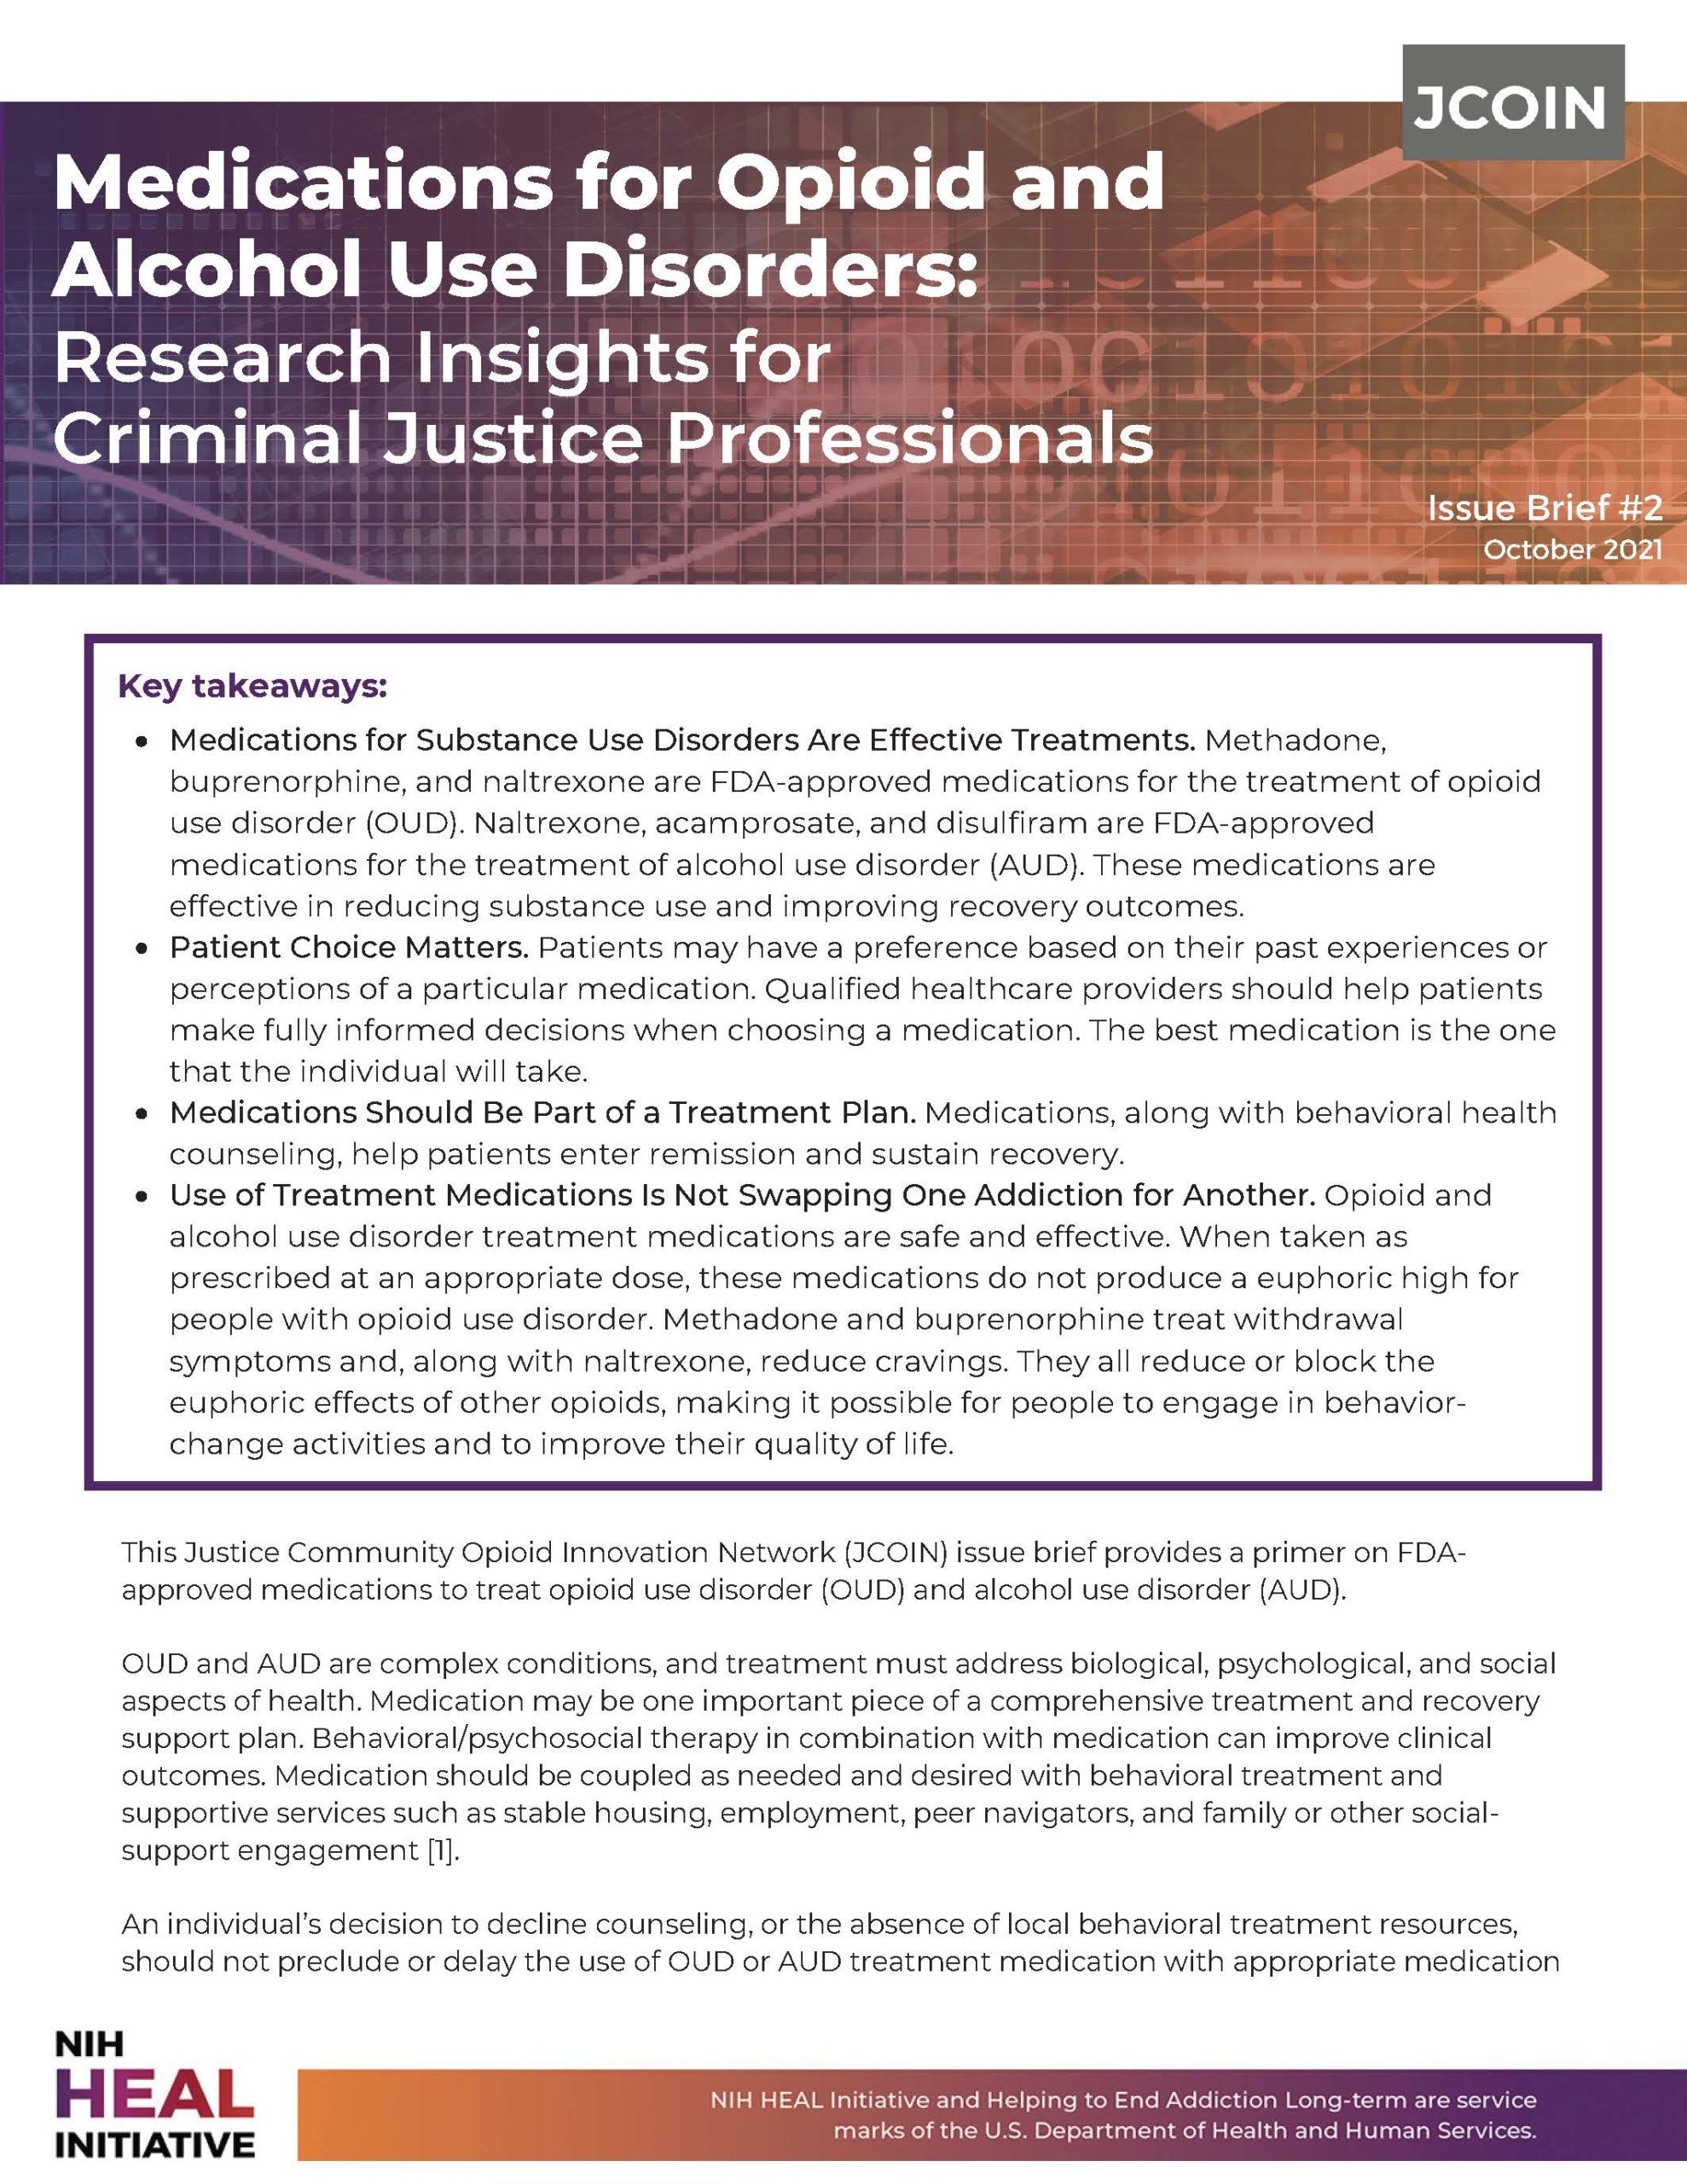 Medications for Opioid and Alcohol Use Disorders